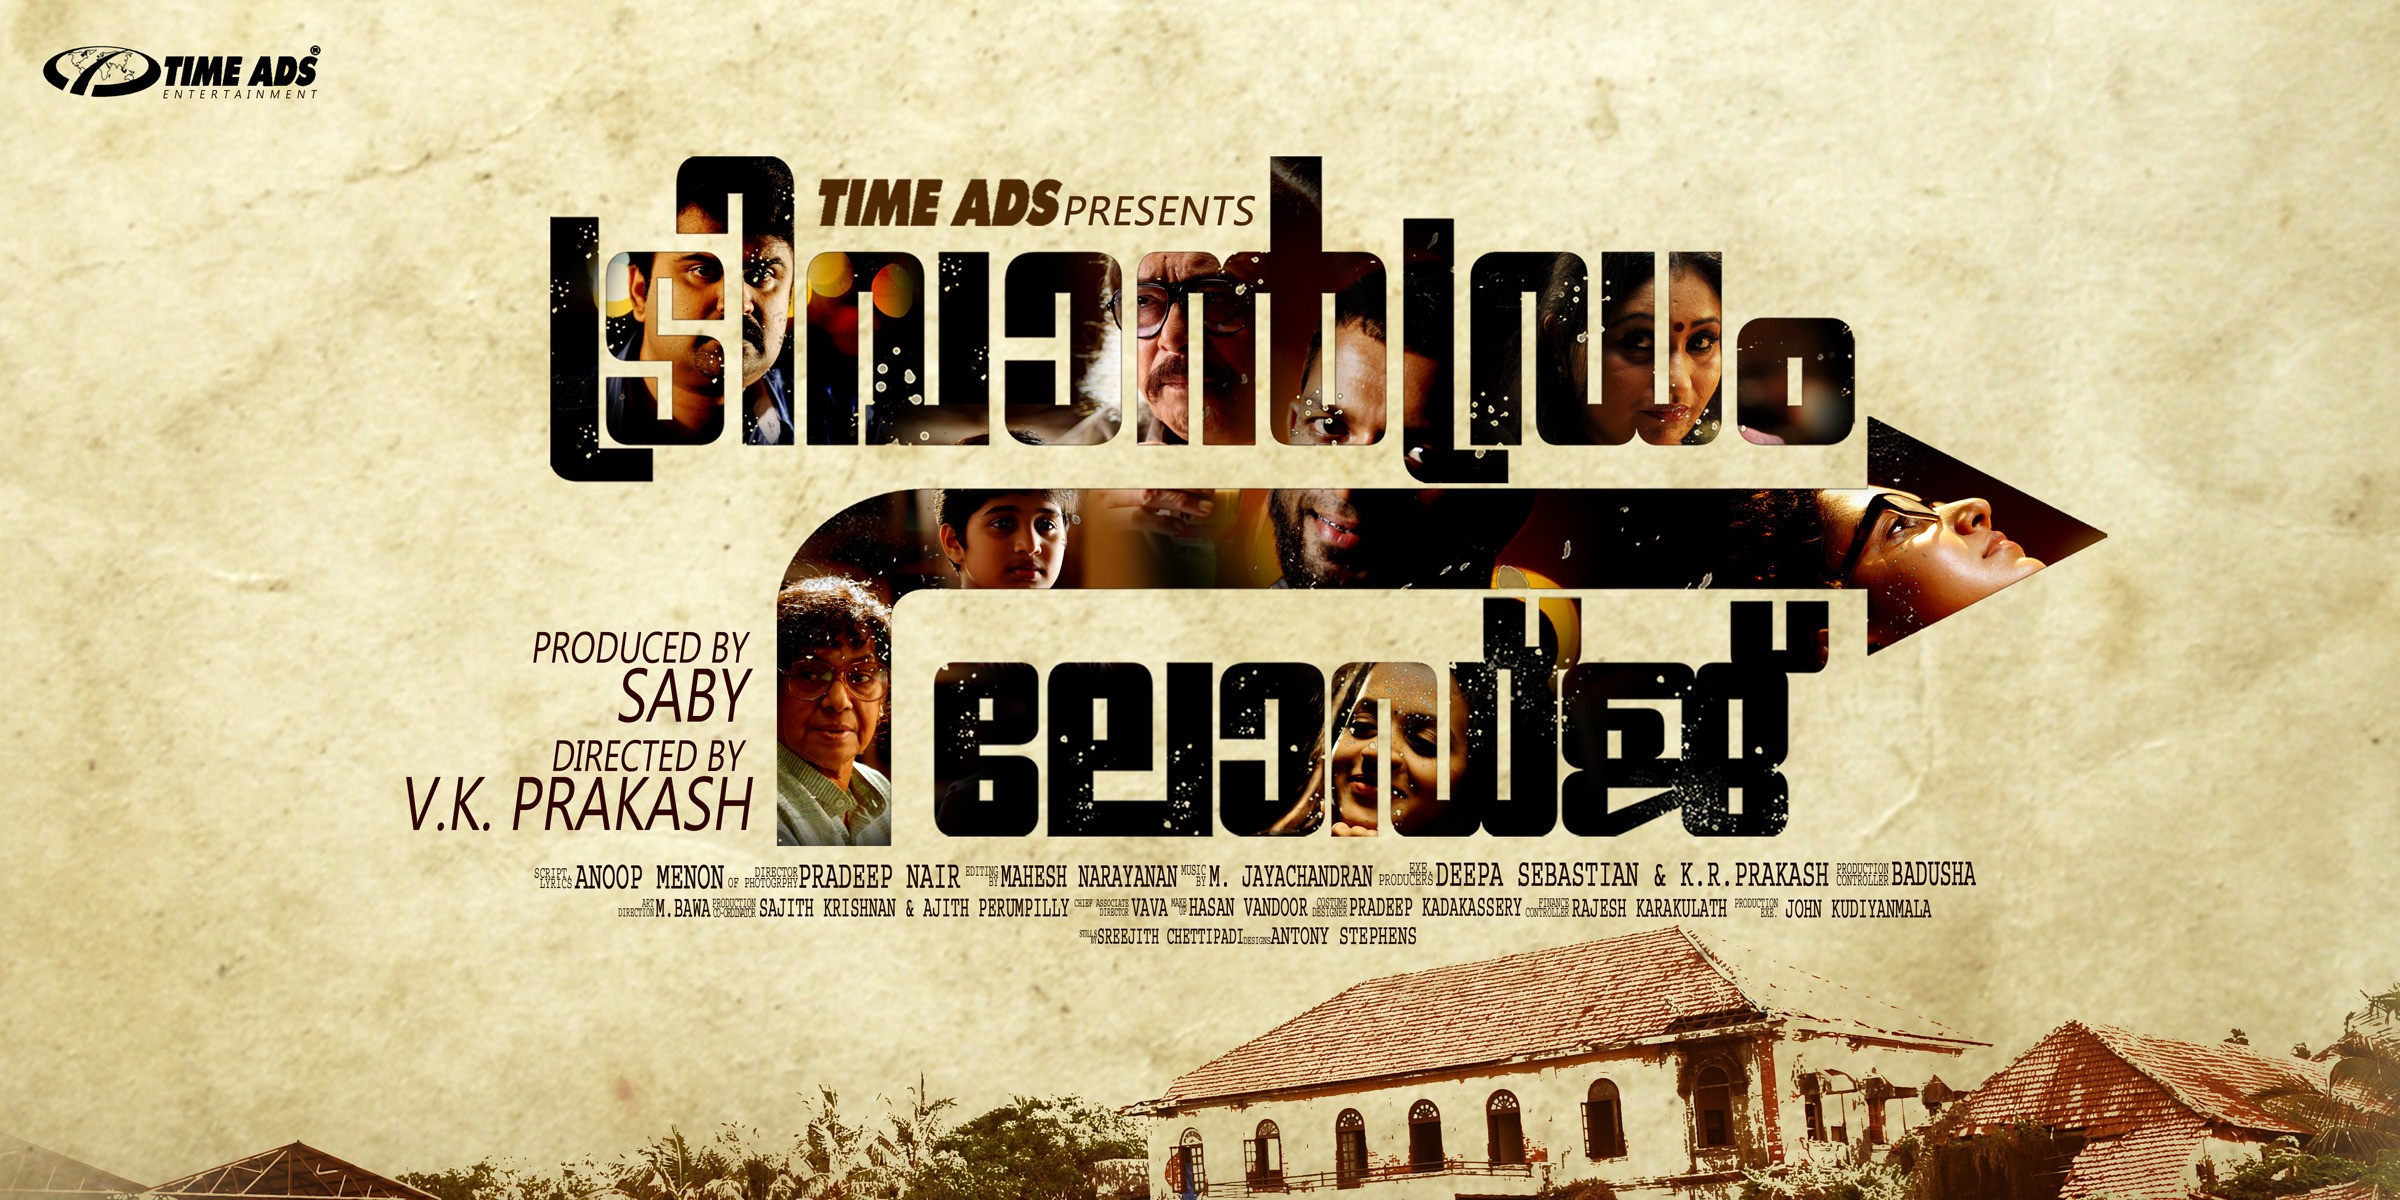 Mega Sized Movie Poster Image for Trivandrum Lodge (#19 of 34)